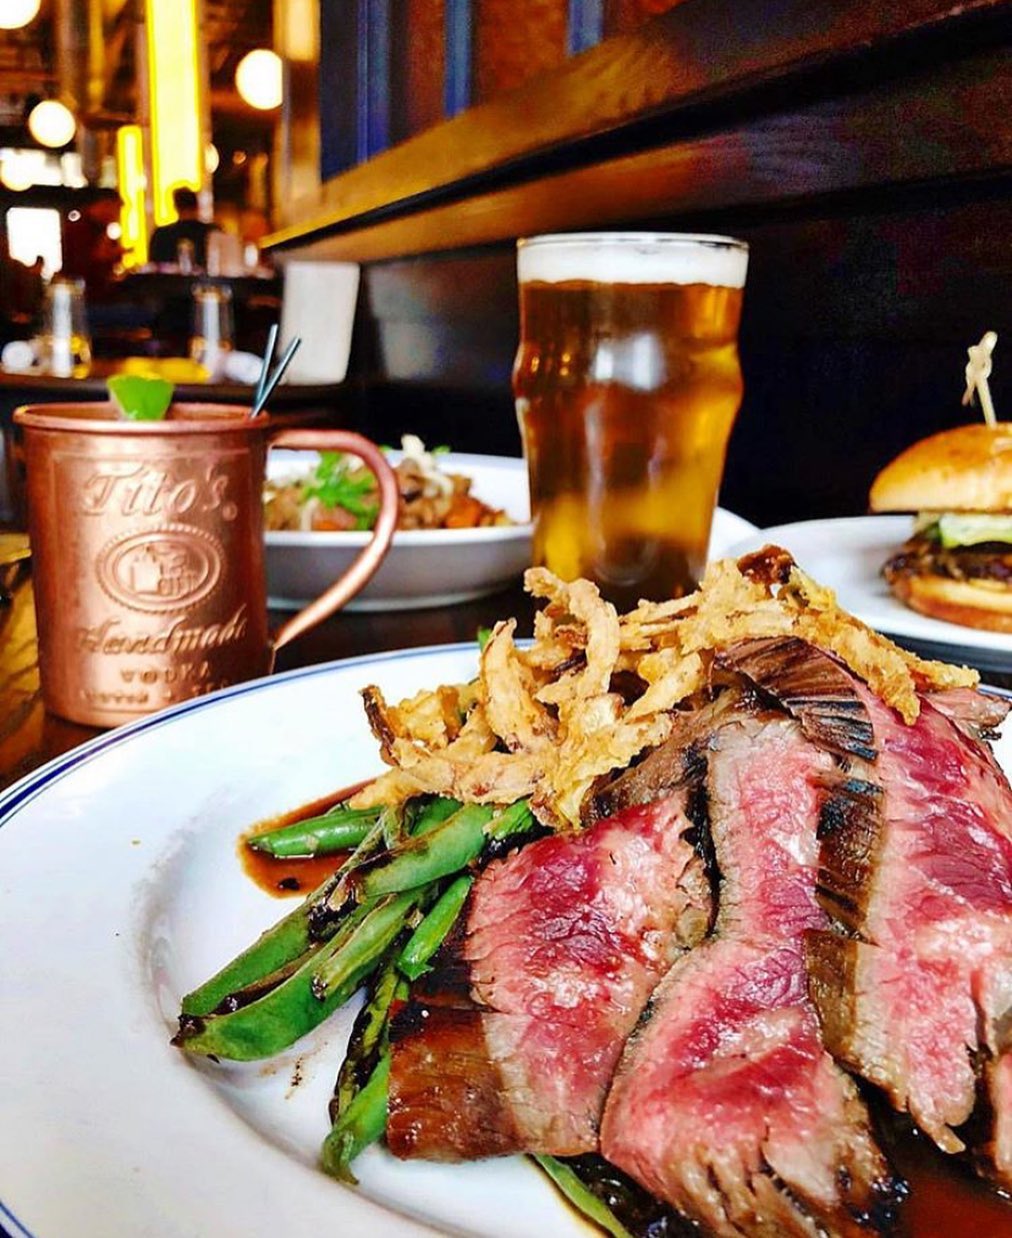 Steak frites with beer and Moscow mule from Butcher's Union. Photo by Instagram user @butchersuniongr